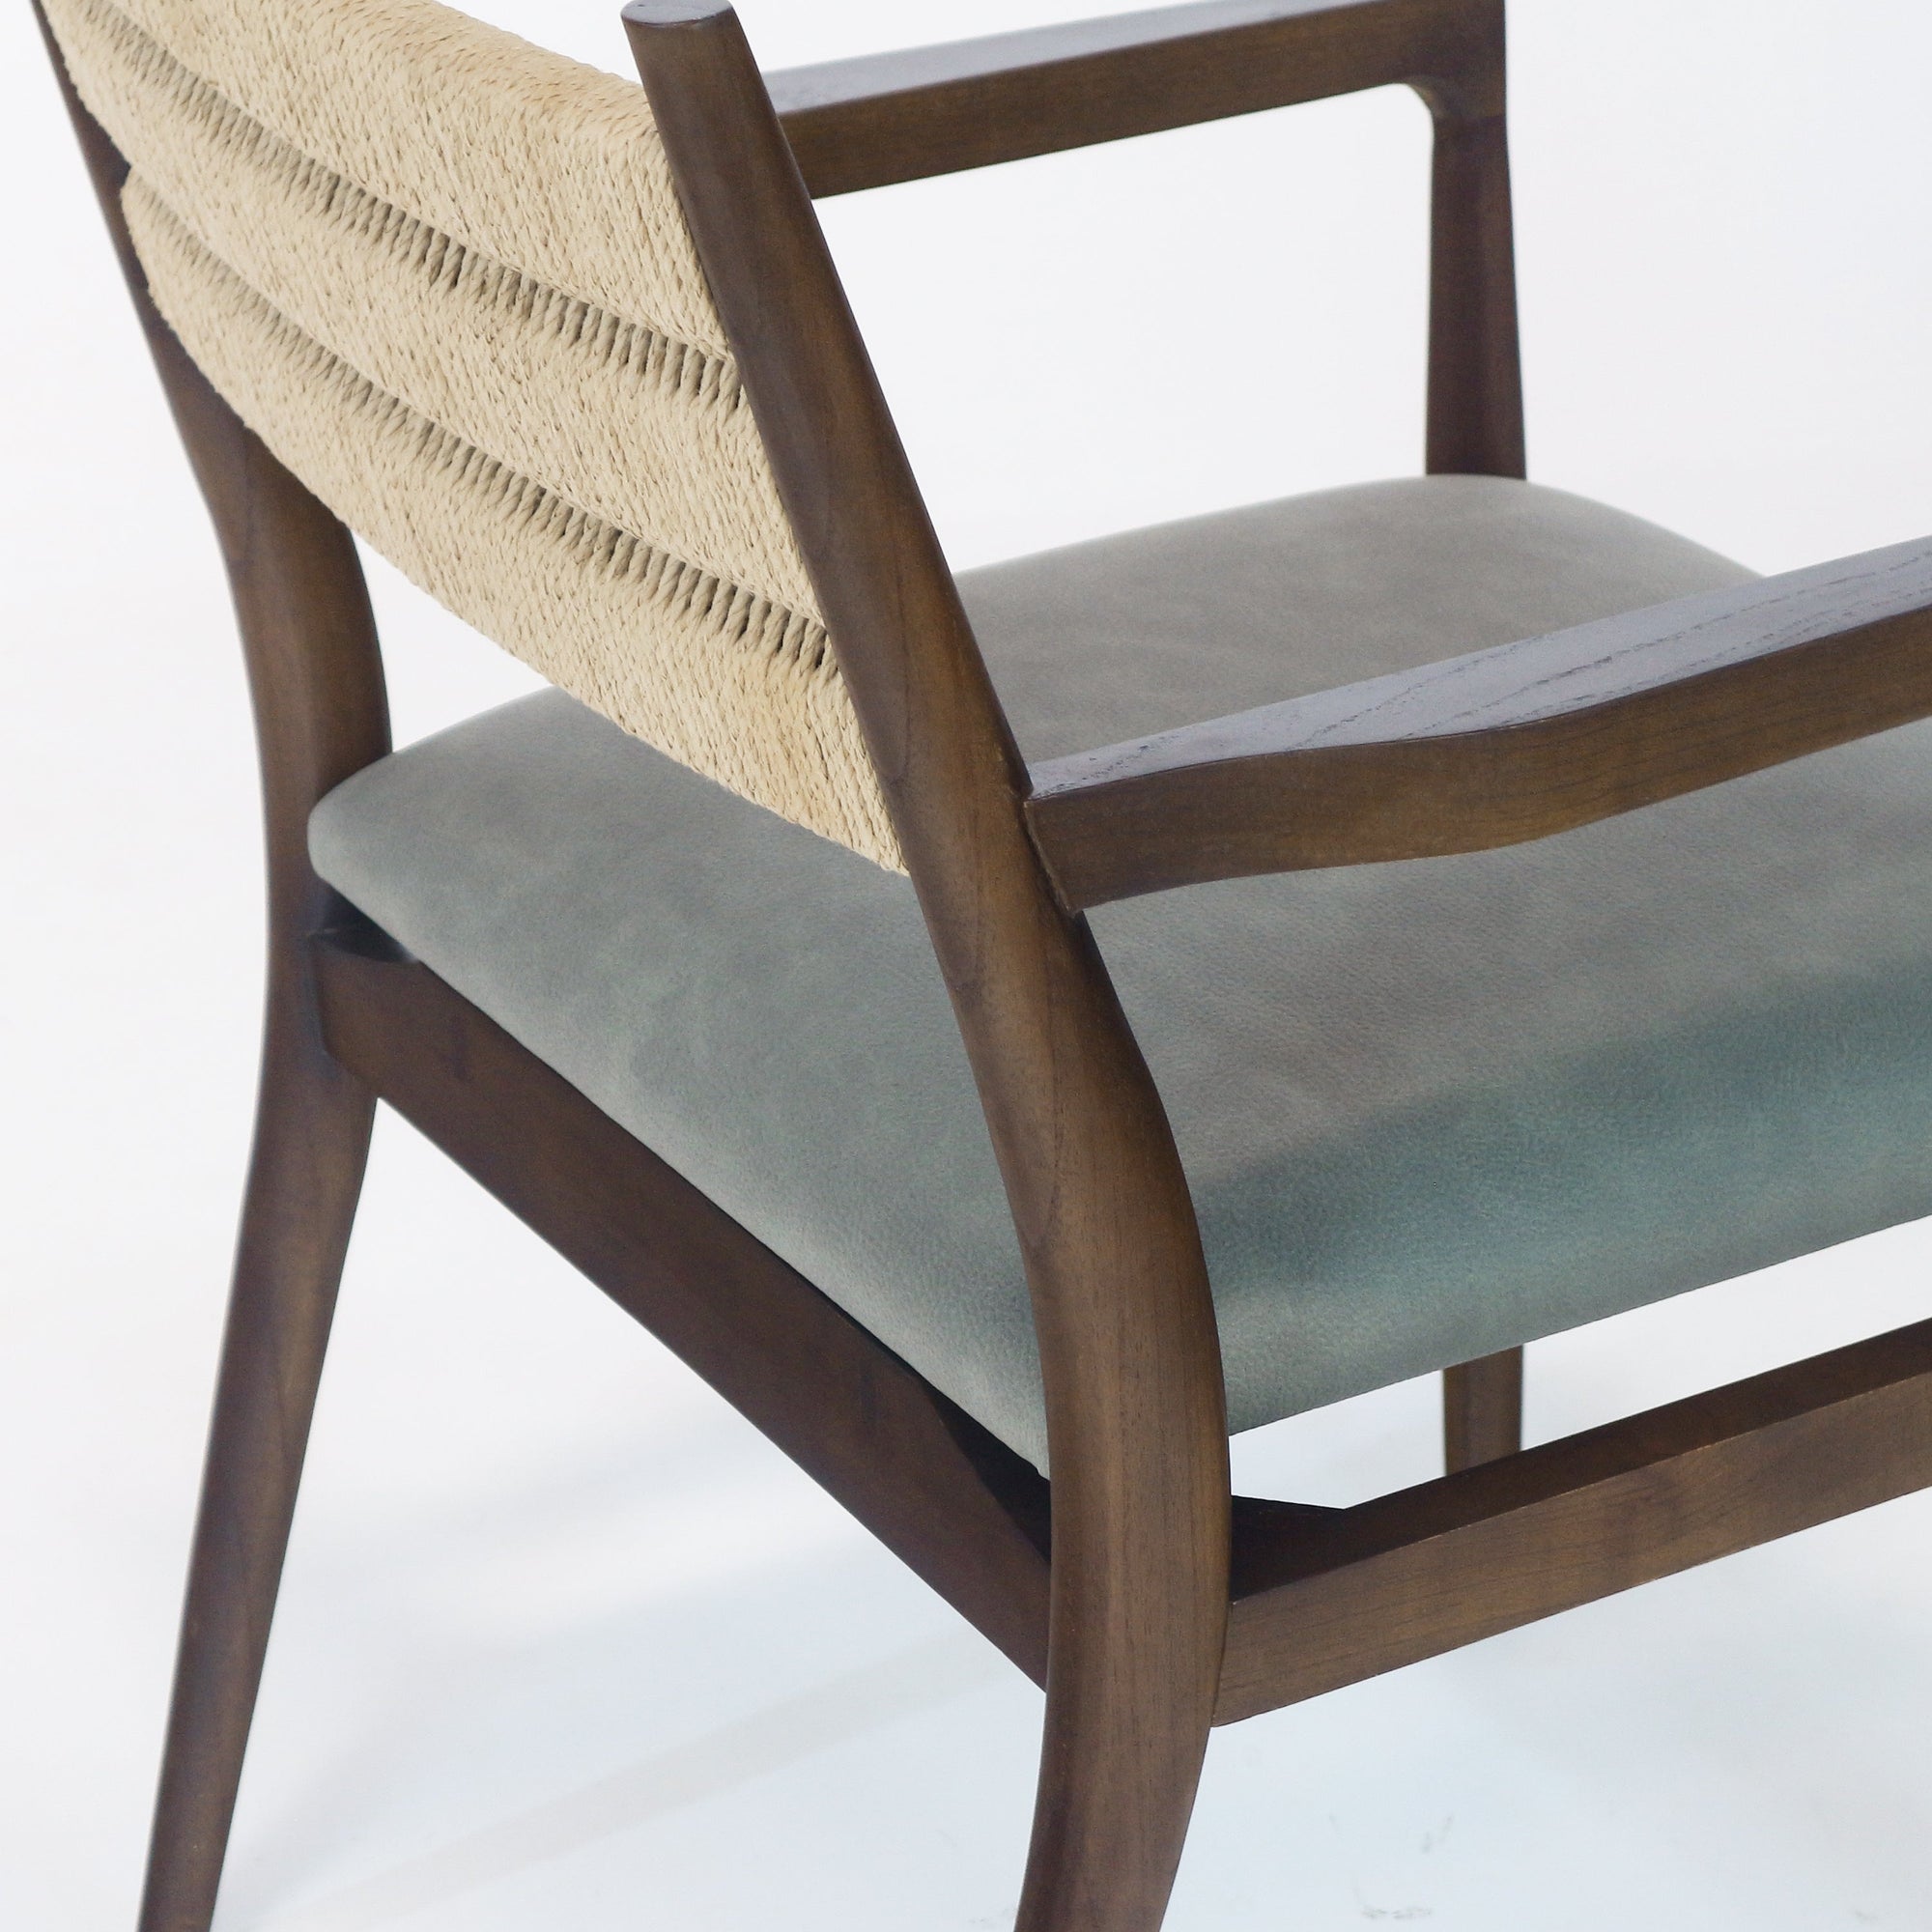 Samsara Dining Chair with Rope Backrest with Blue Leather Seat - INTERIORTONIC